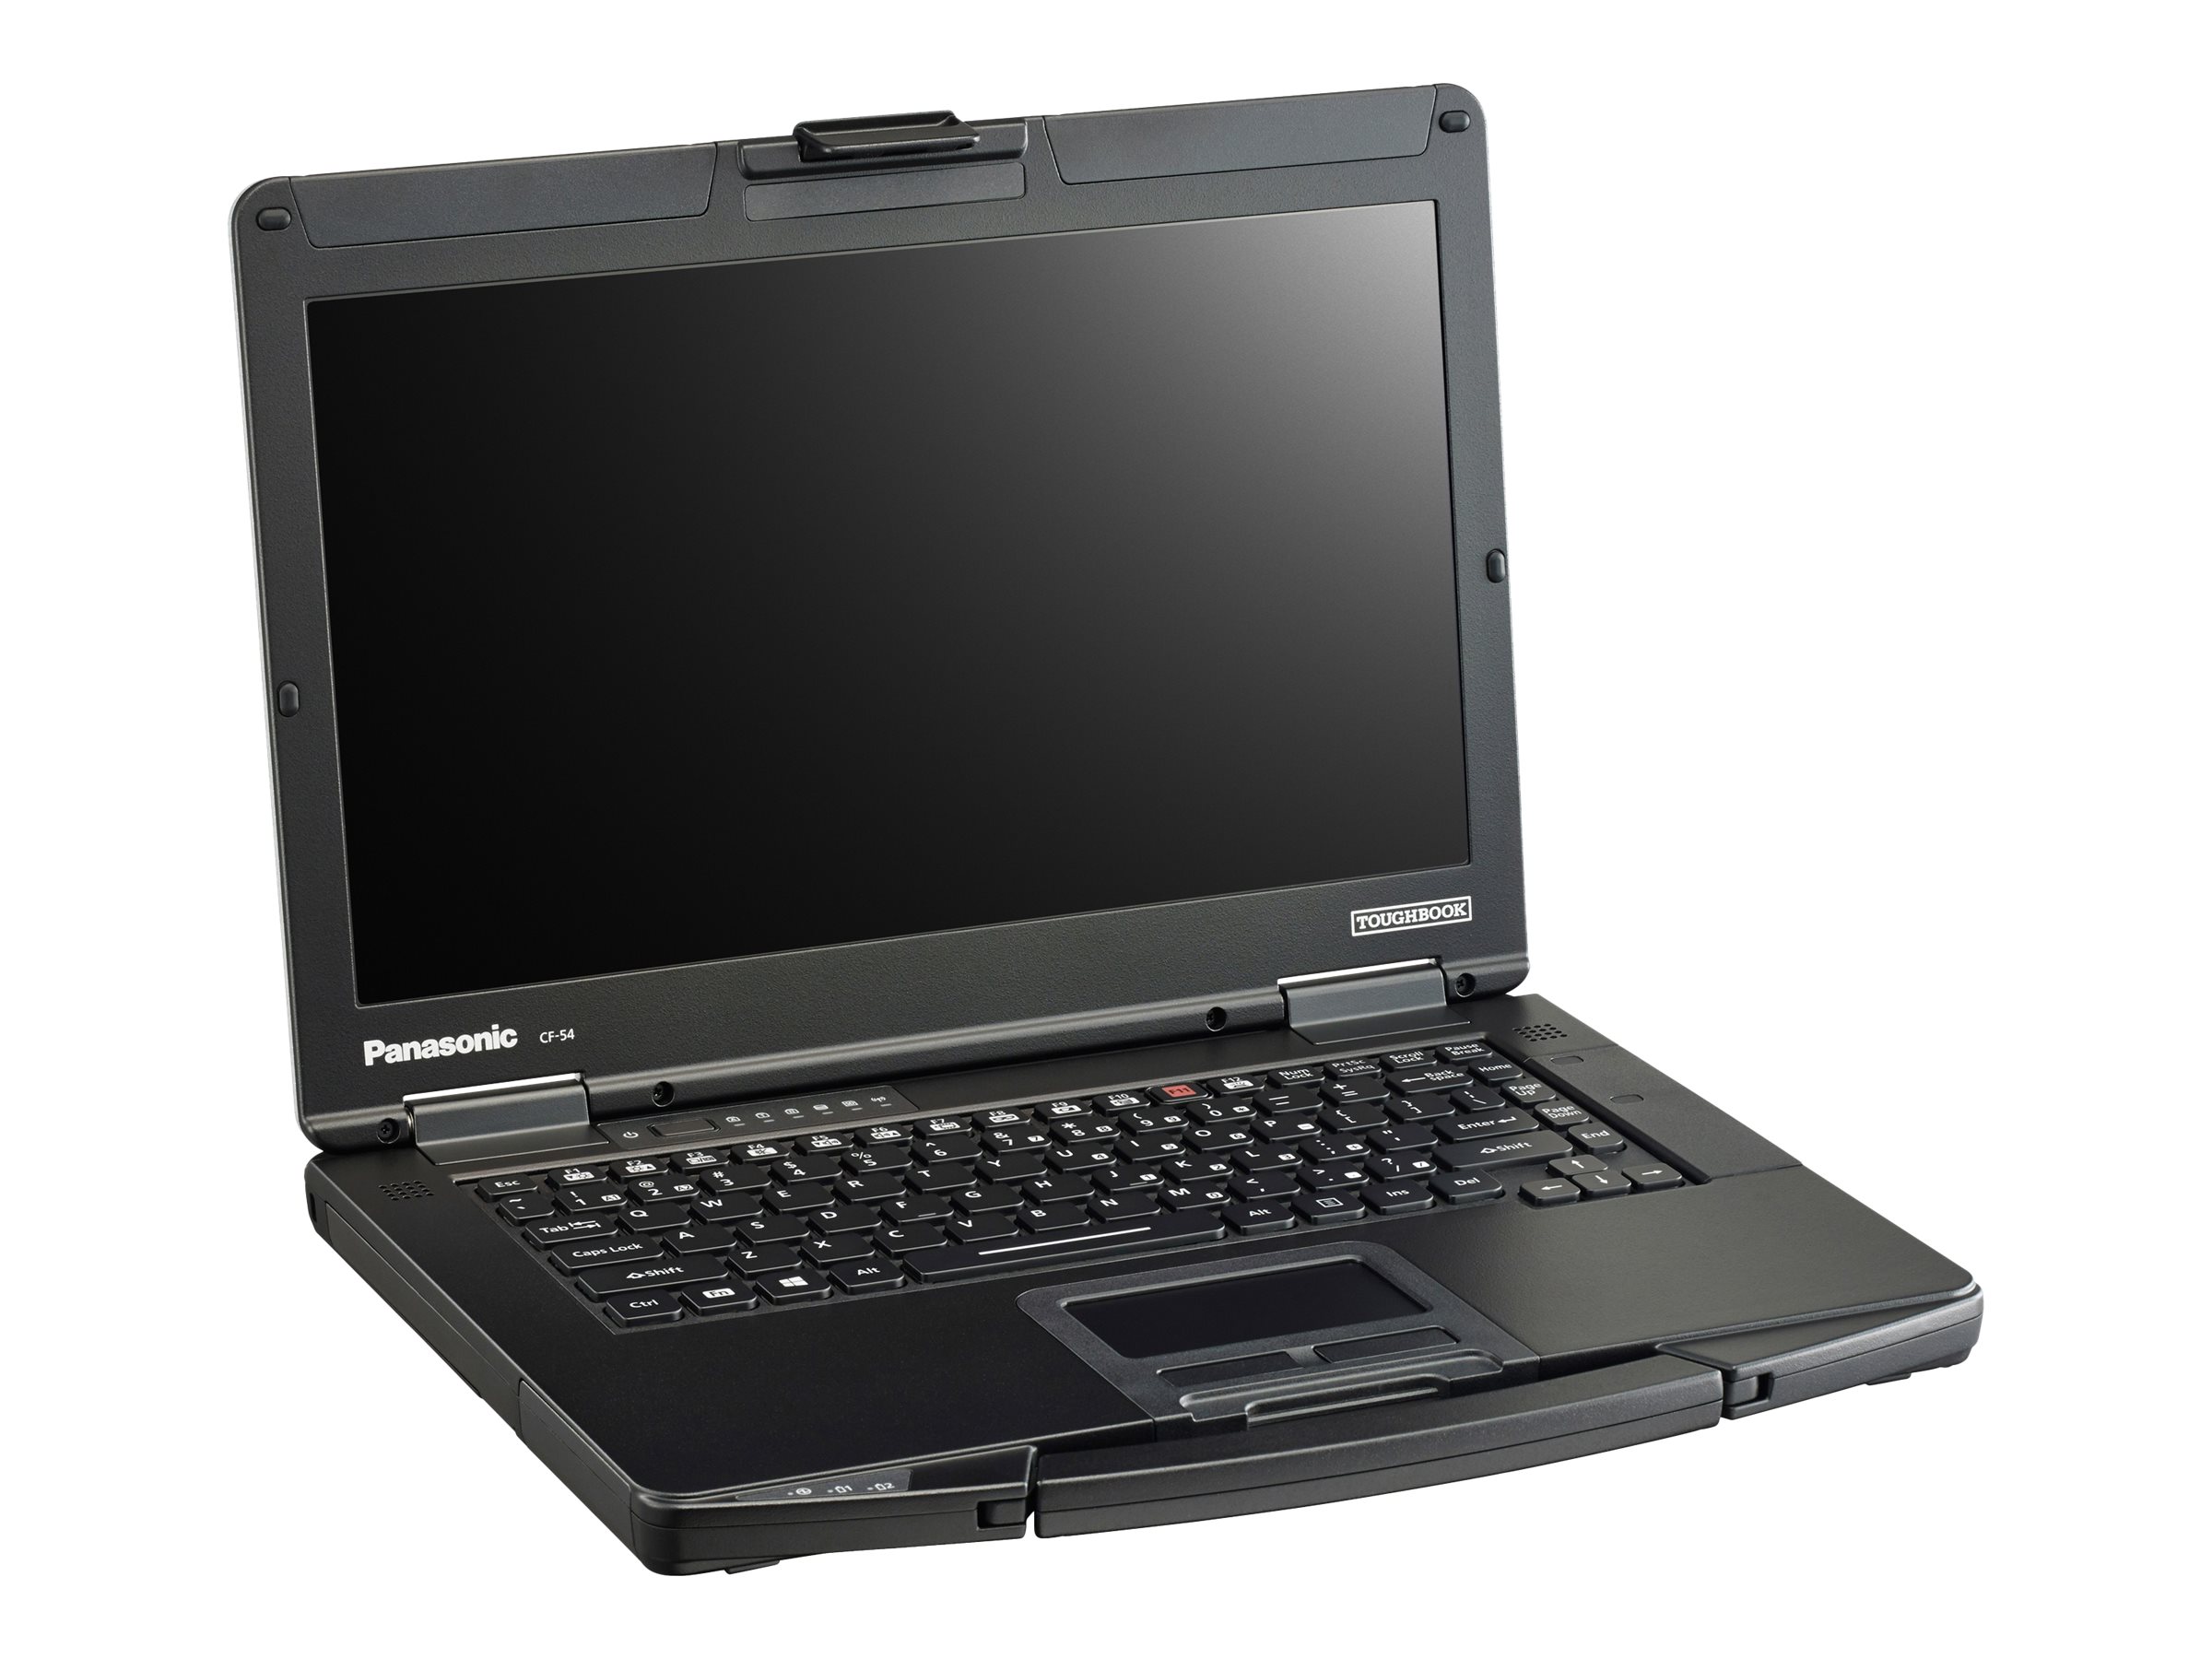 Panasonic Toughbook 54 Prime - Intel Core i5 - 7300U / up to 3.5 GHz - Win 10 Pro 64-bit - HD Graphics 620 - 8 GB RAM - 256 GB SSD - 14" 1366 x 768 (HD) - with Toughbook Preferred - image 4 of 16